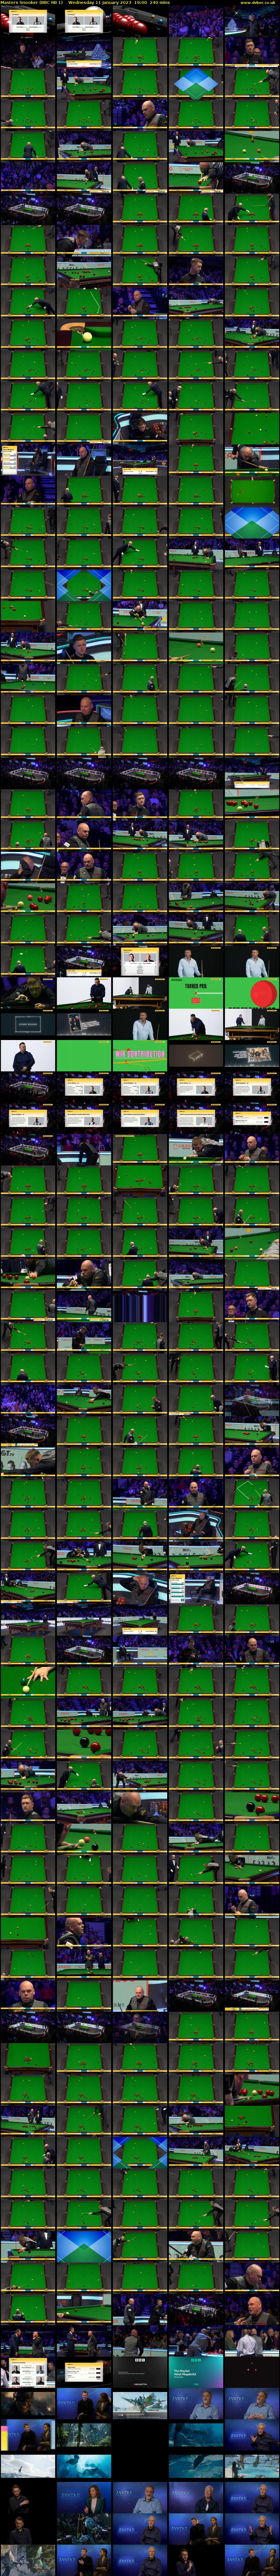 Masters Snooker (BBC RB 1) Wednesday 11 January 2023 19:00 - 23:00